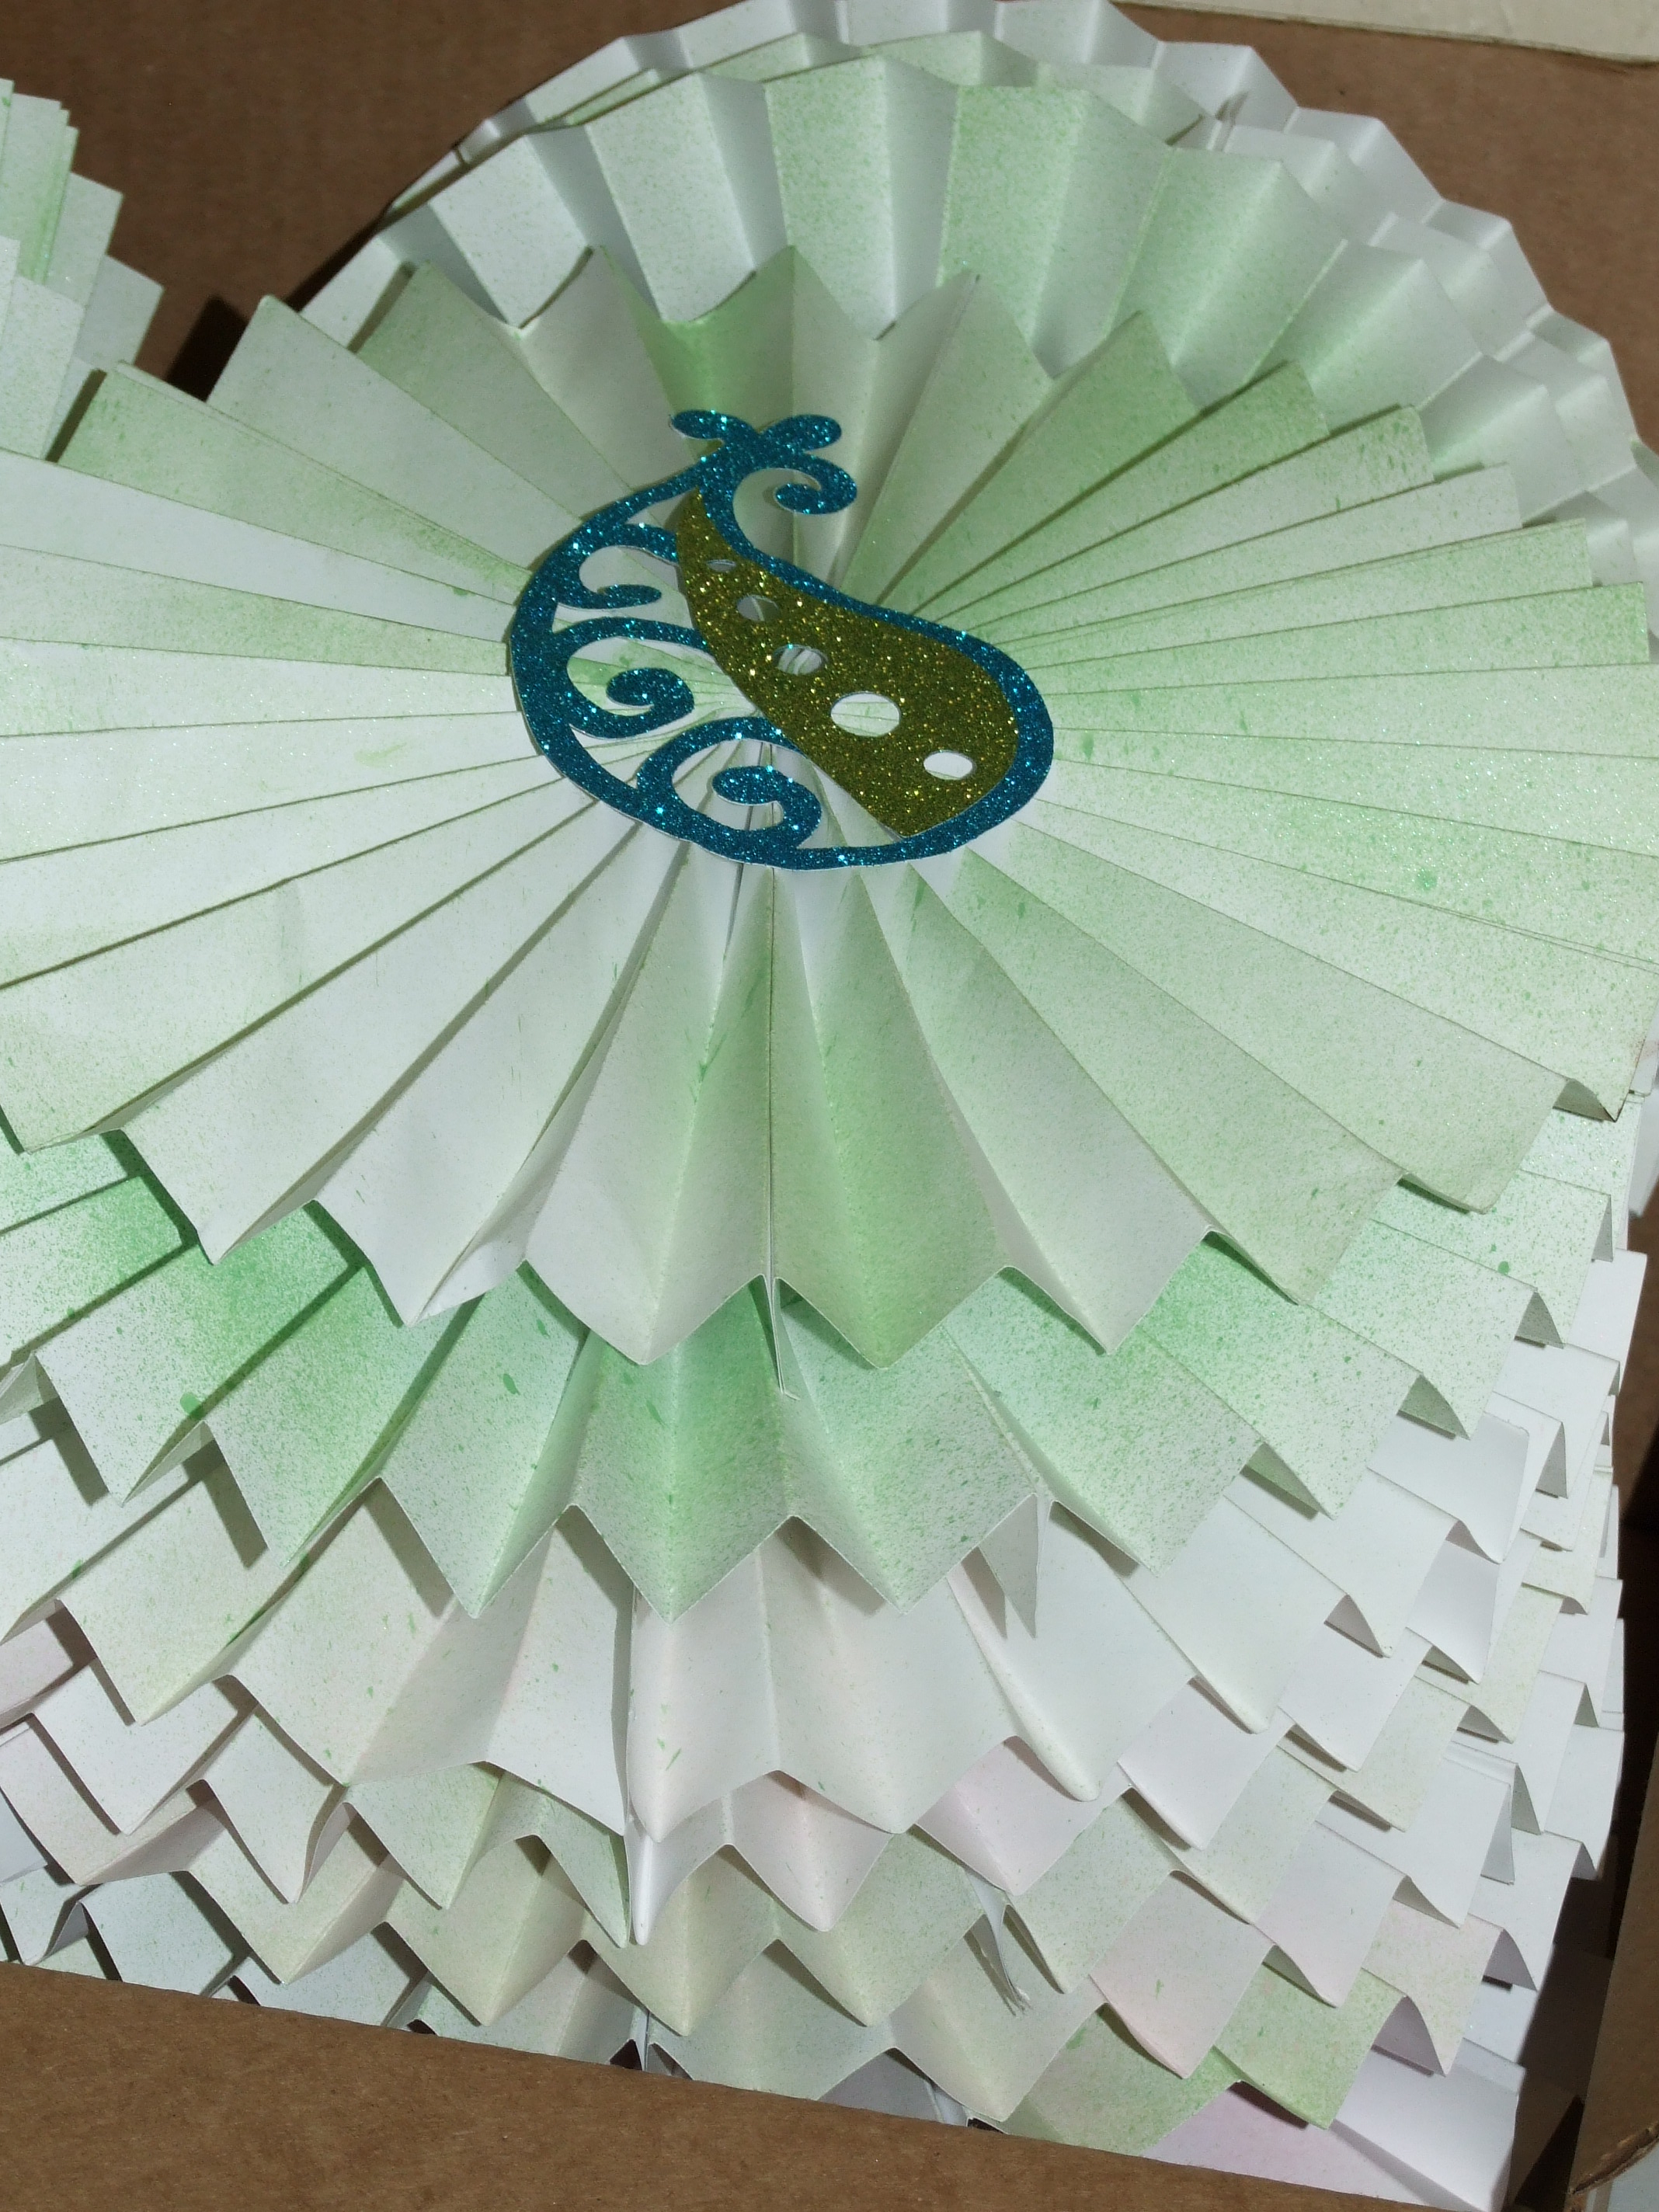 Some paper rosettes I made with help from Mrs. Charlotte and Lillian. These will hang around at our event.